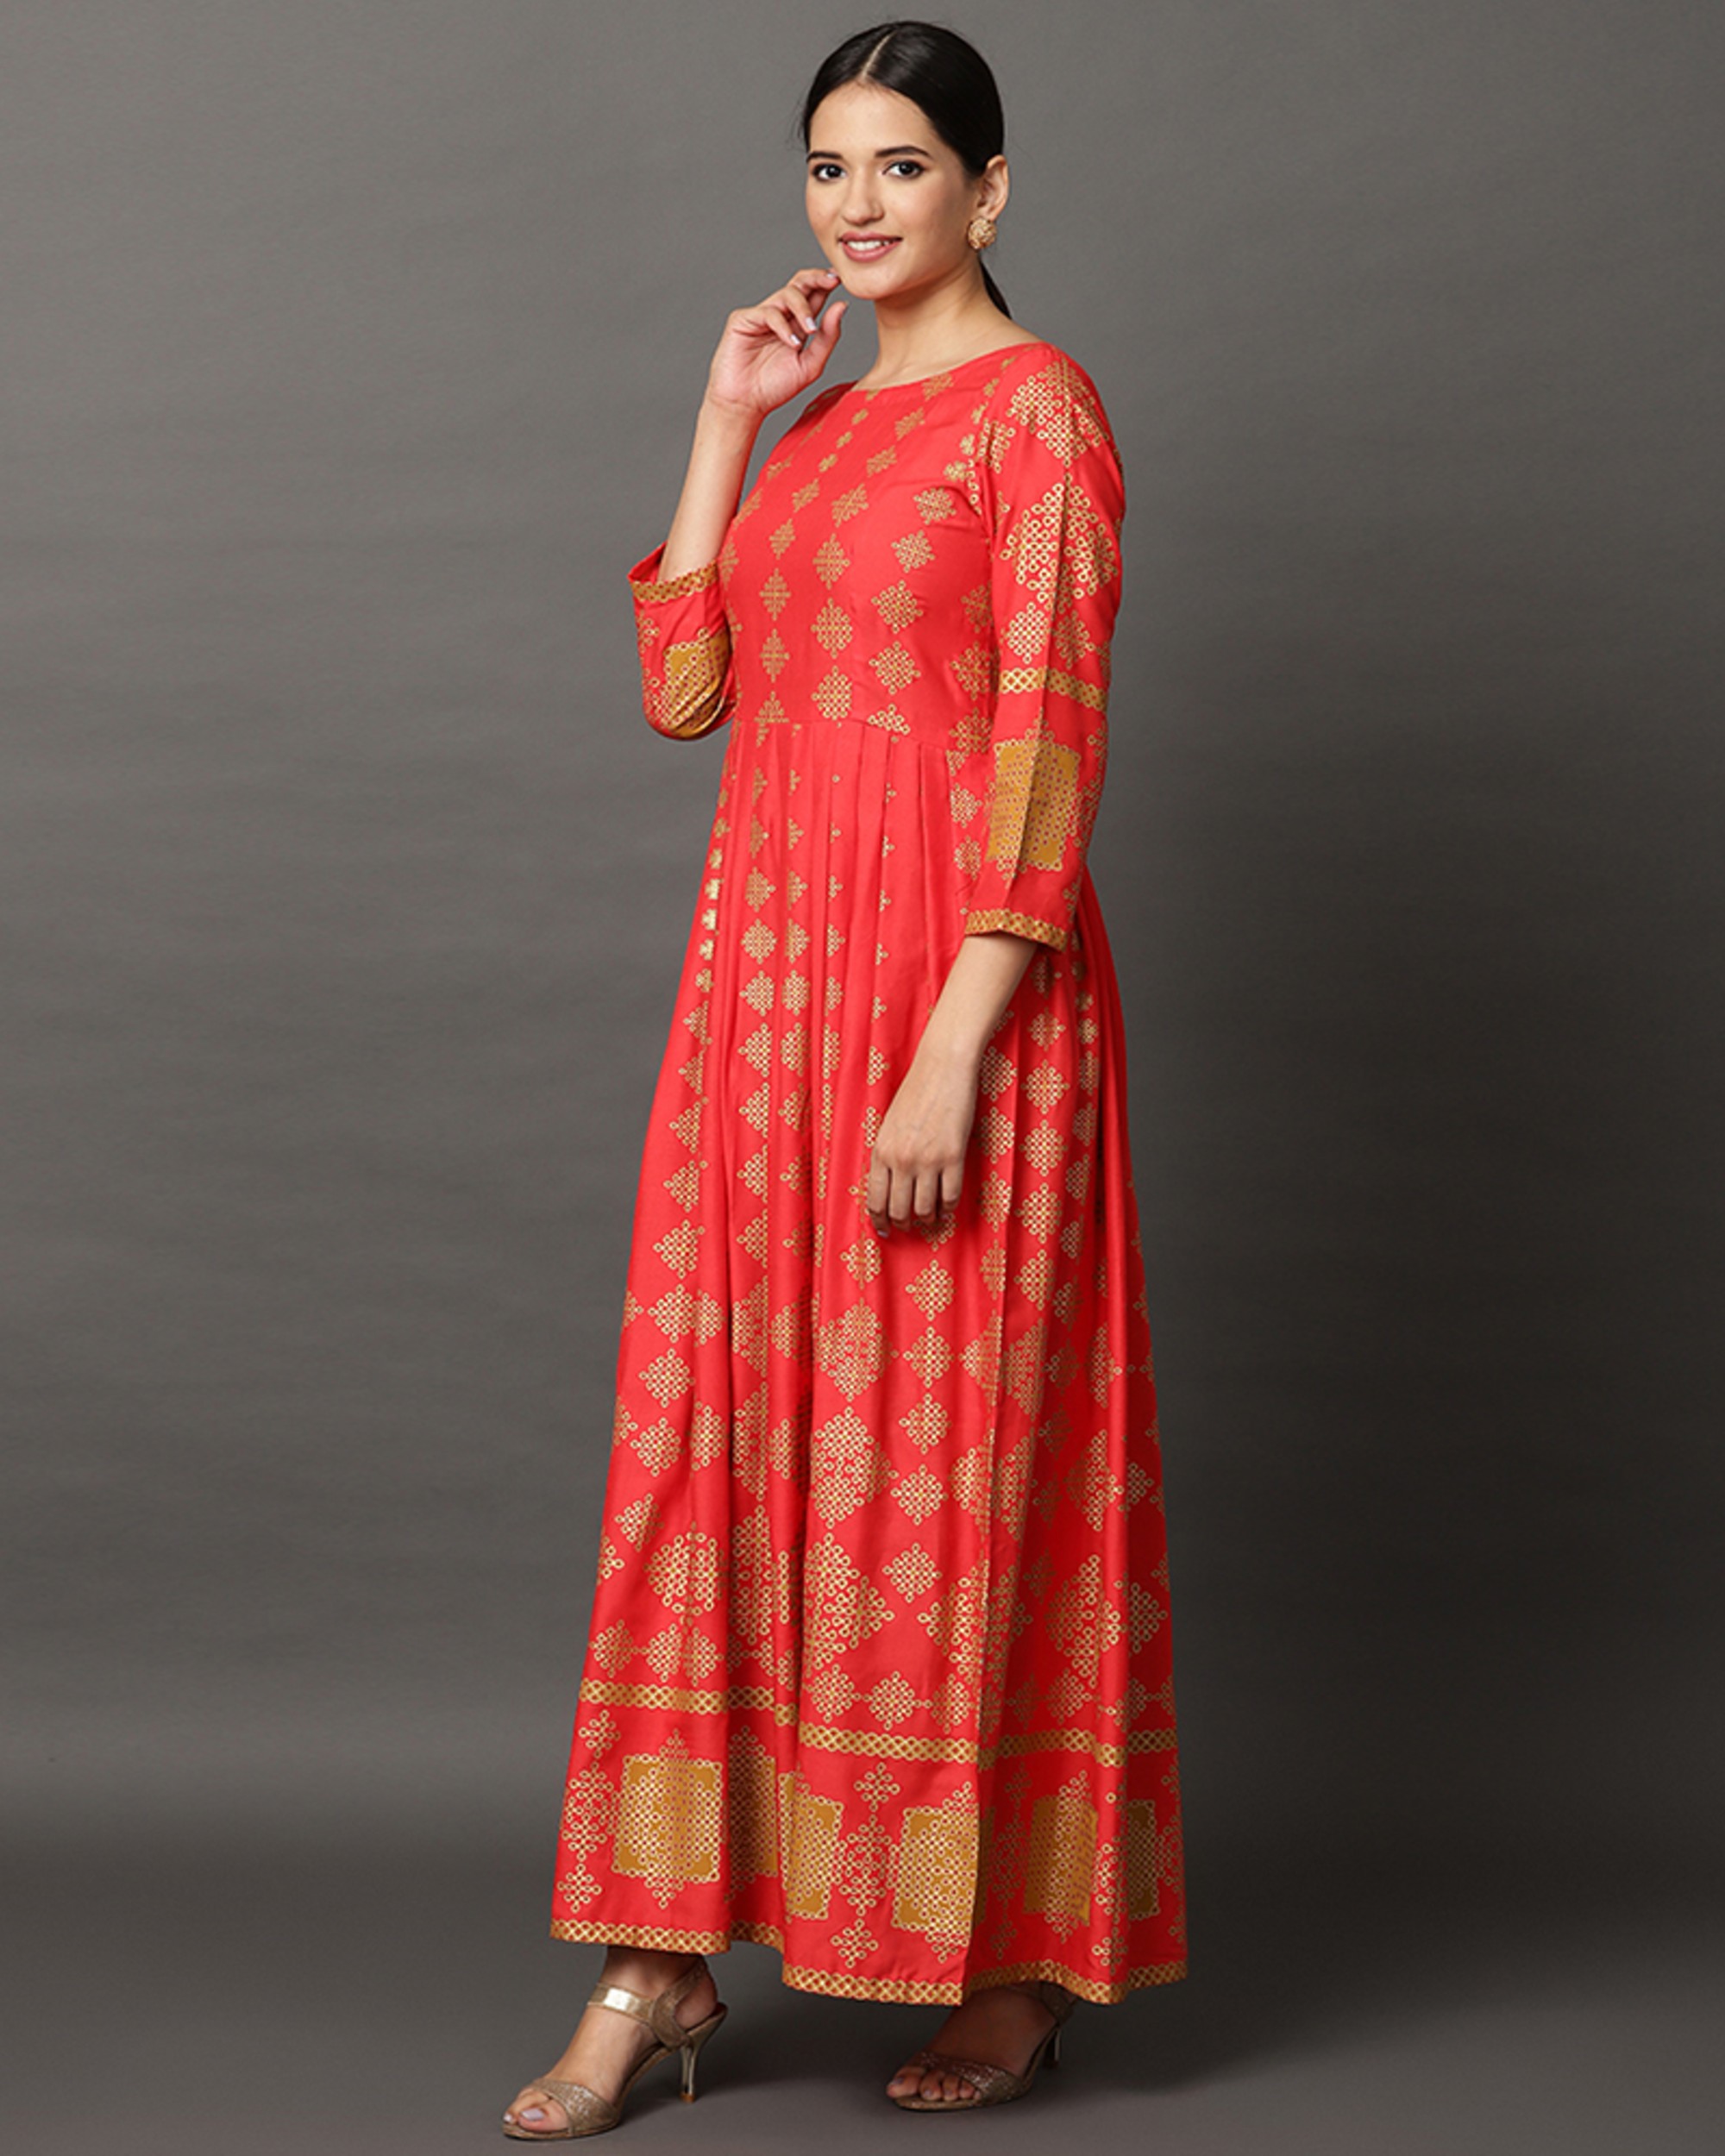 Coral red and gold pleated maxi dress by Rivaaj | The Secret Label